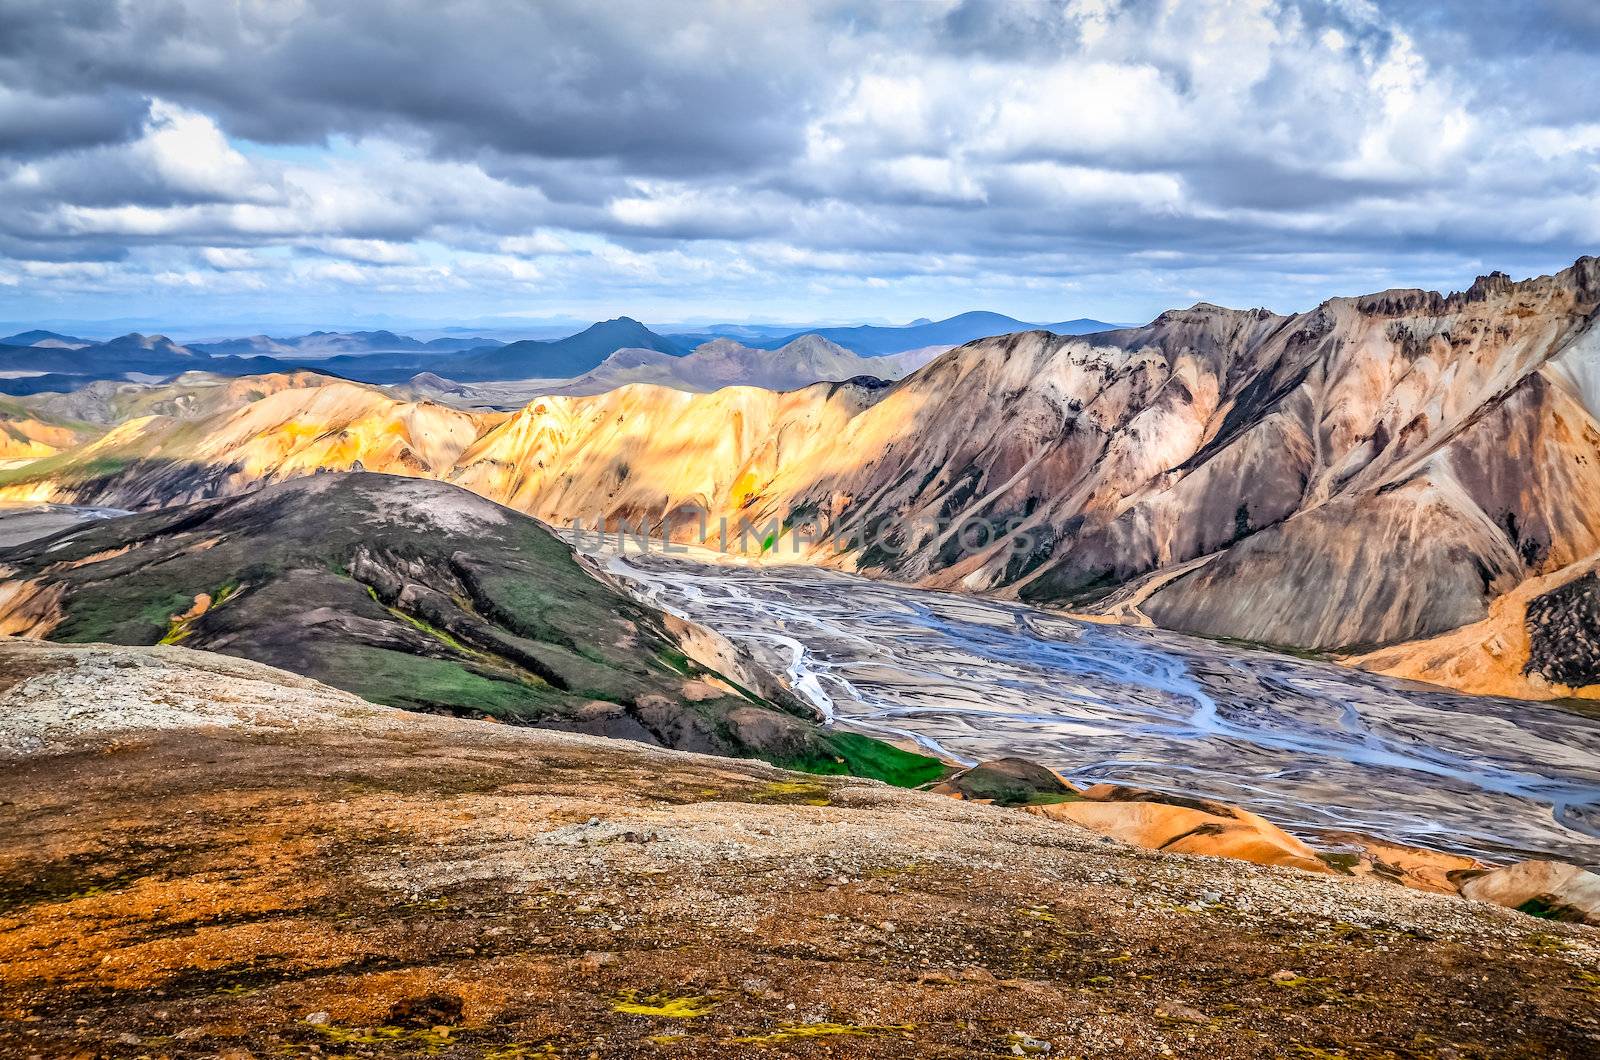 Scenic landscape view of Landmannalaugar colorful mountains by martinm303